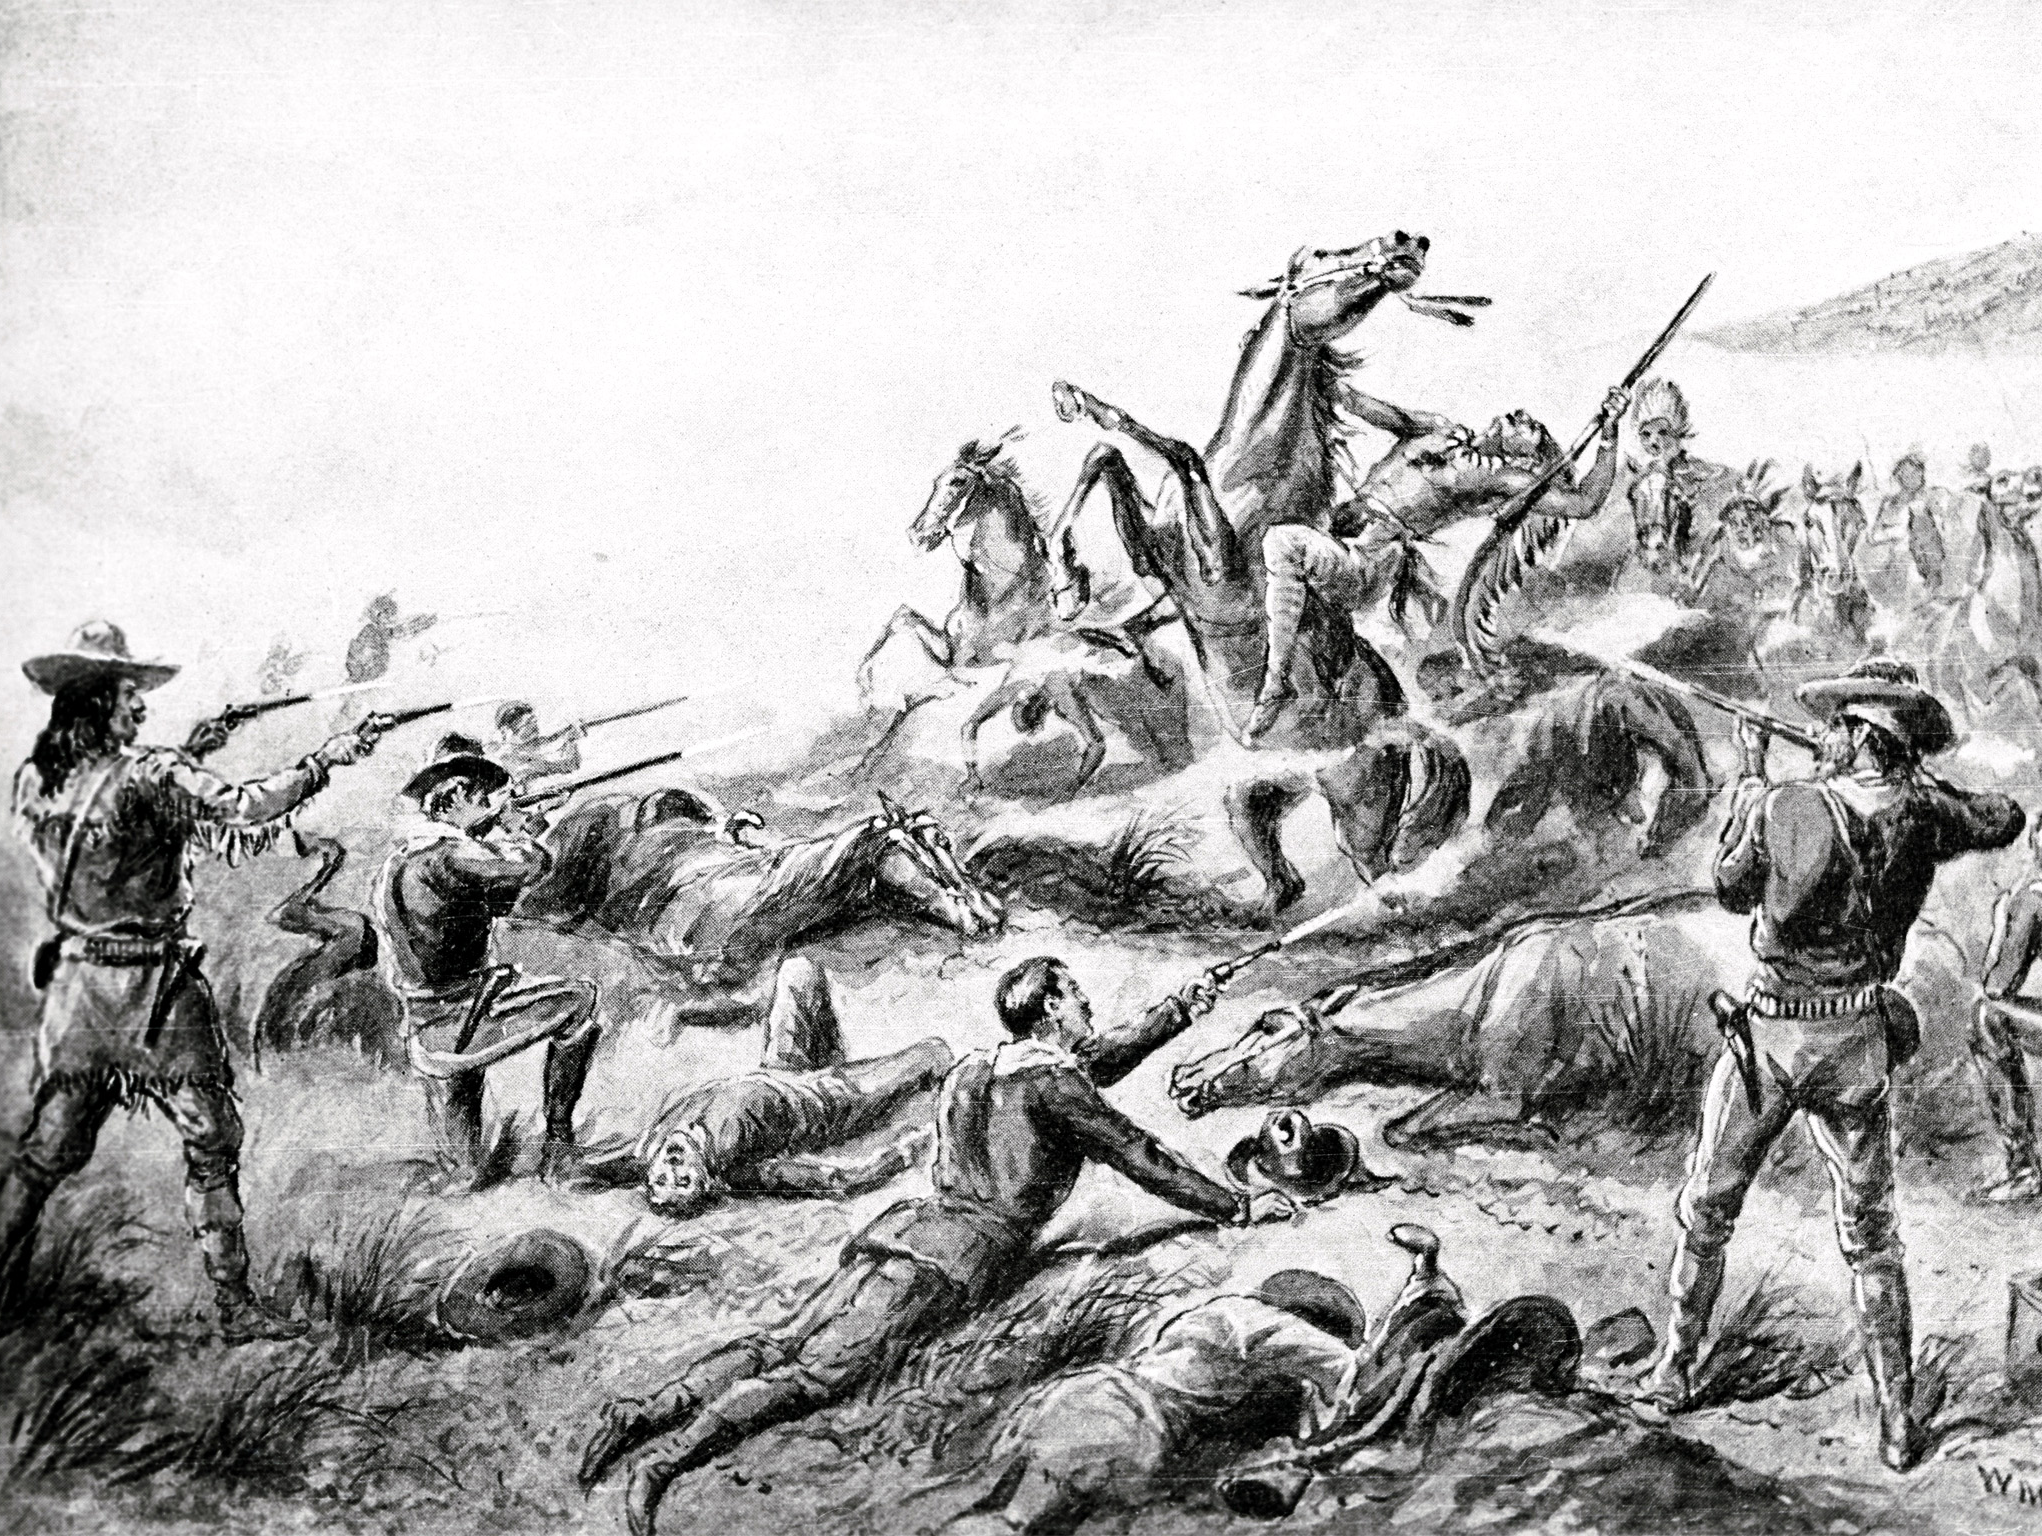 A painting of the 1890 massacre at Wounded Knee